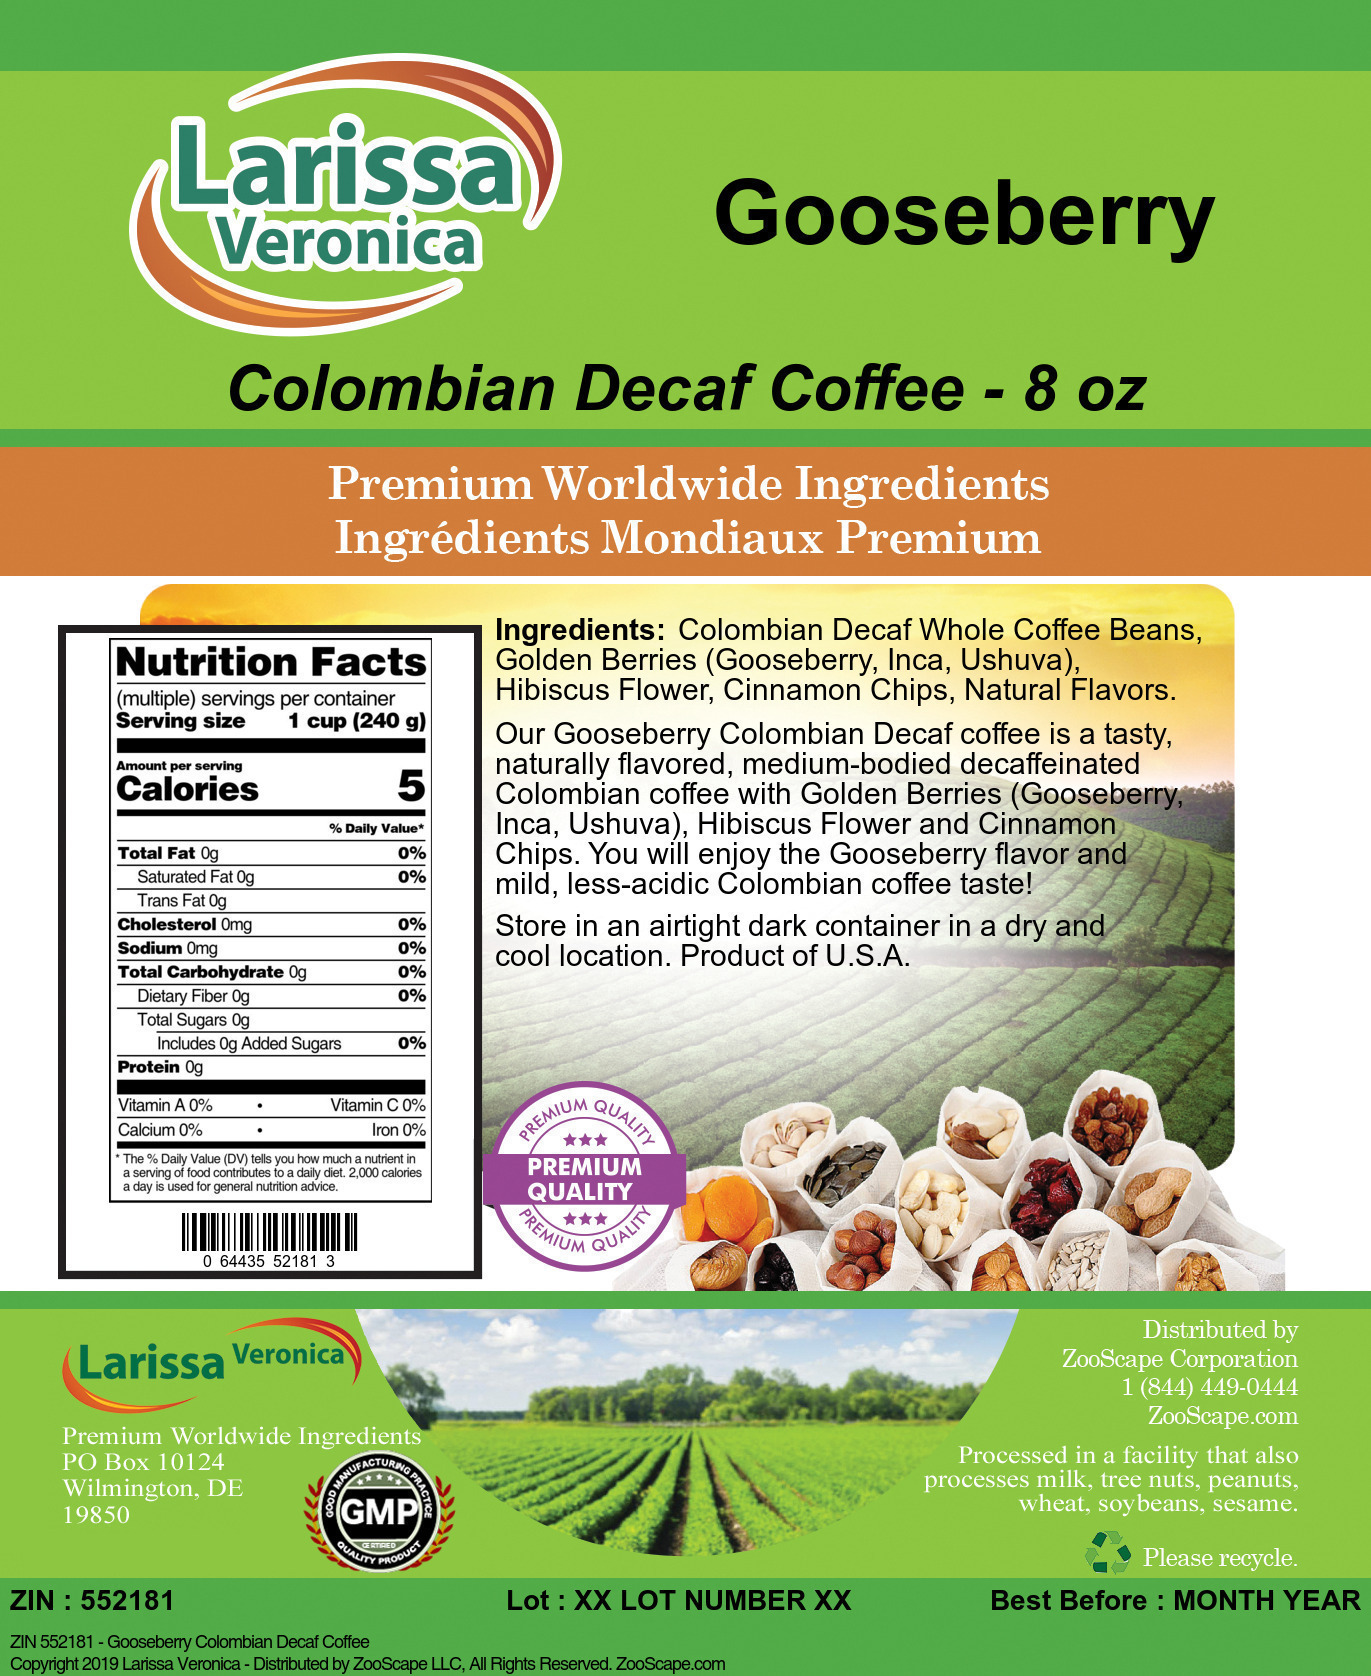 Gooseberry Colombian Decaf Coffee - Label